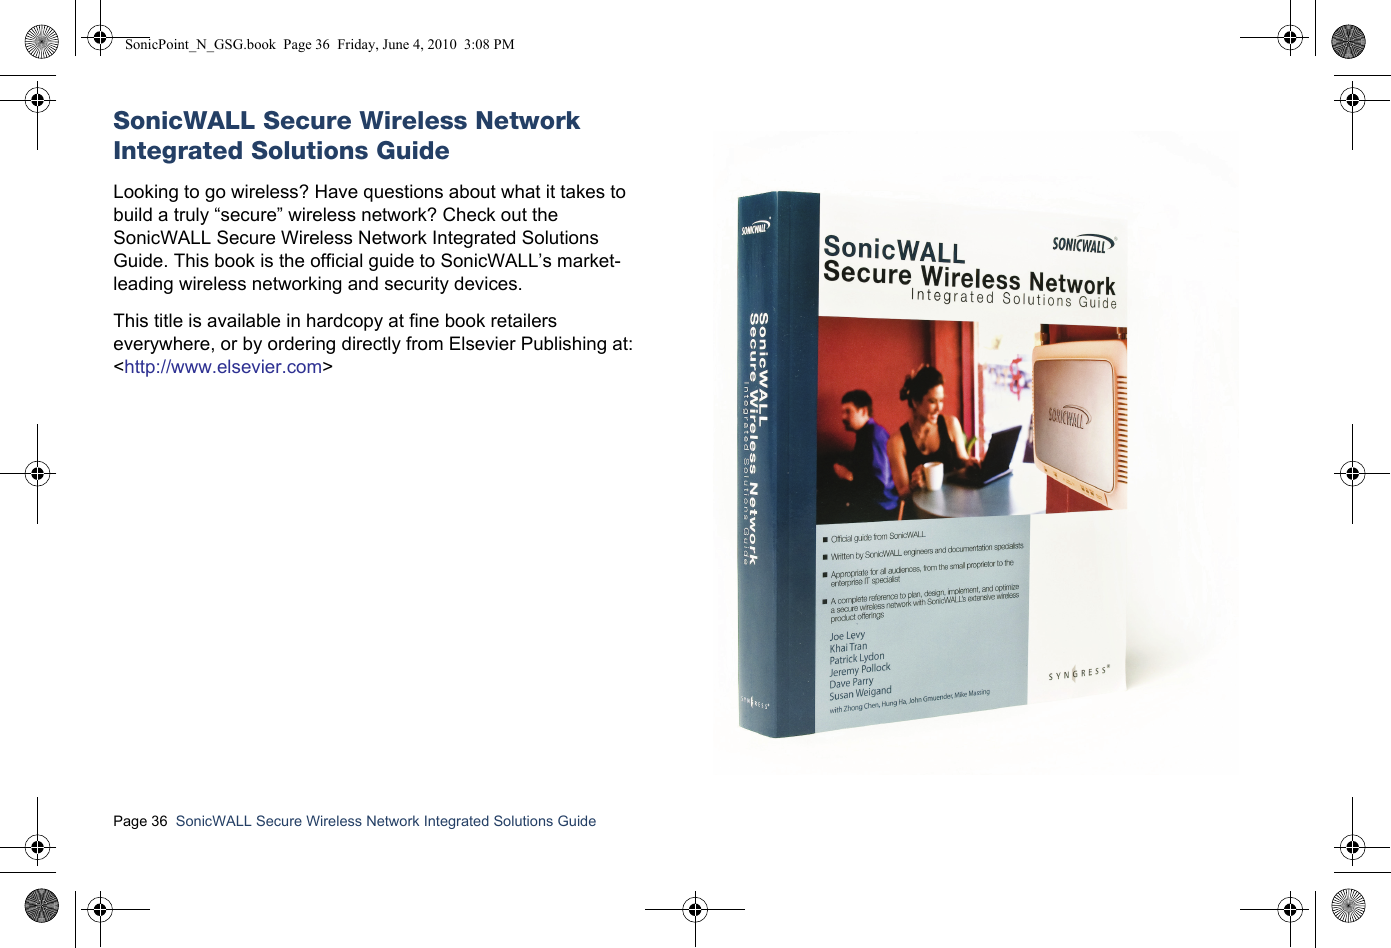 Page 36  SonicWALL Secure Wireless Network Integrated Solutions Guide  SonicWALL Secure Wireless Network Integrated Solutions GuideLooking to go wireless? Have questions about what it takes to build a truly “secure” wireless network? Check out the SonicWALL Secure Wireless Network Integrated Solutions Guide. This book is the official guide to SonicWALL’s market-leading wireless networking and security devices. This title is available in hardcopy at fine book retailers everywhere, or by ordering directly from Elsevier Publishing at:&lt;http://www.elsevier.com&gt;SonicPoint_N_GSG.book  Page 36  Friday, June 4, 2010  3:08 PM